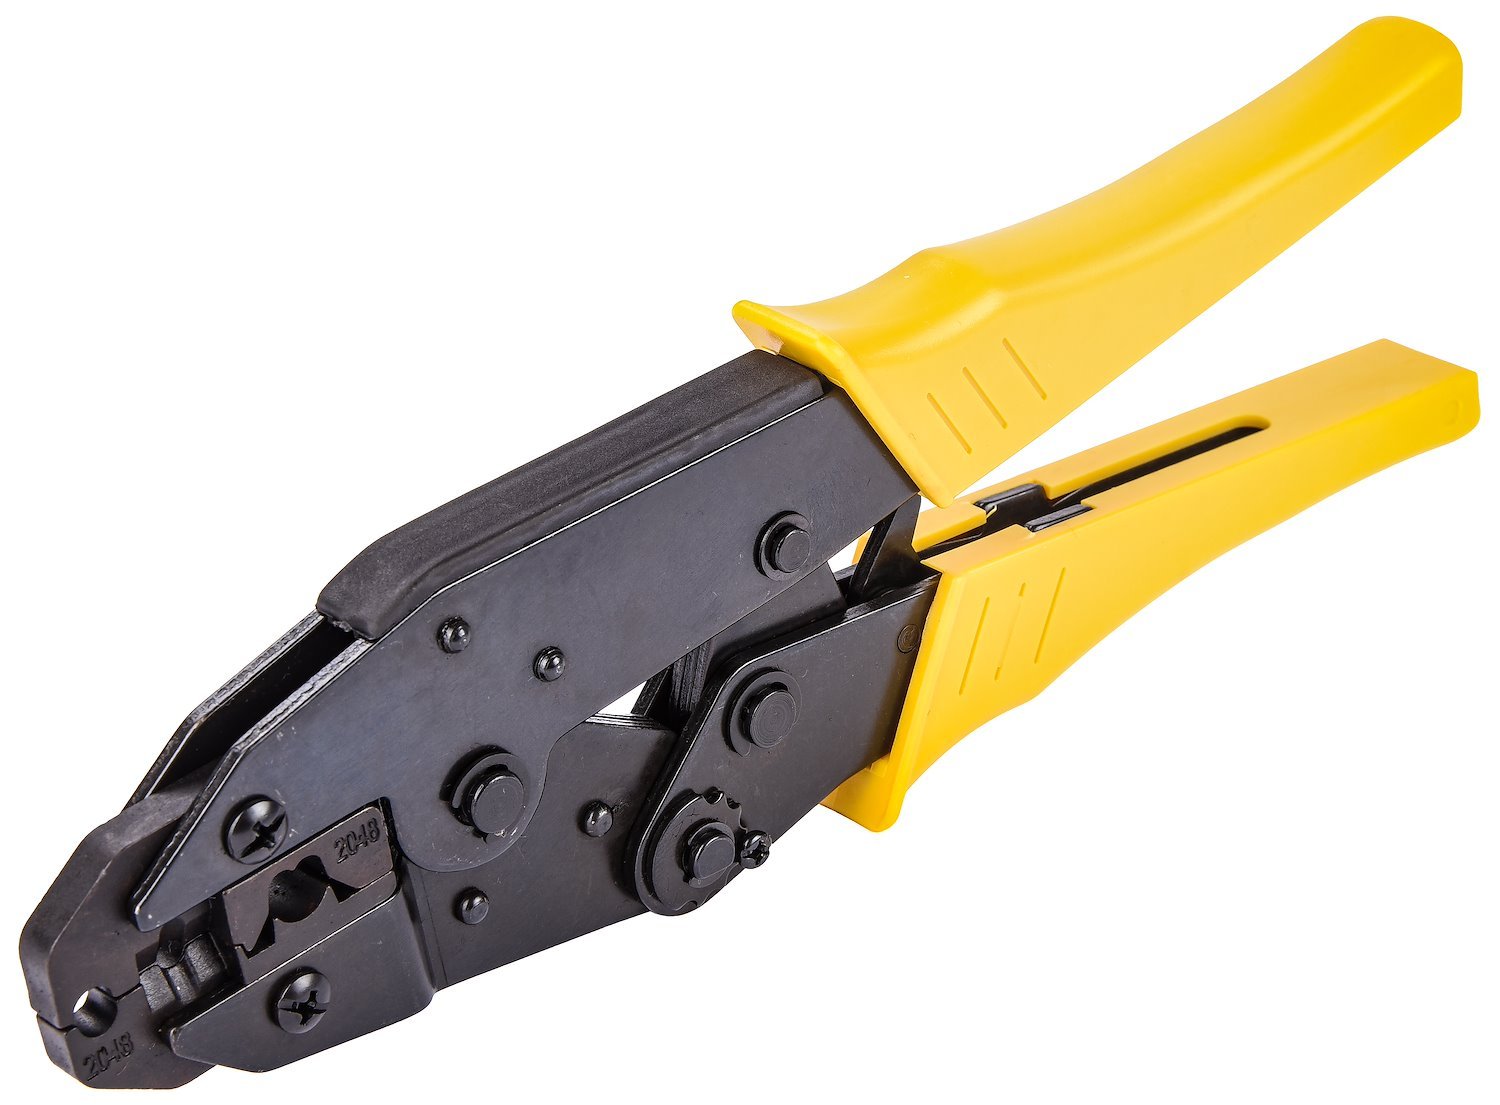 JEGS 555-80570 Spark Plug Wire Crimping Tool for 7 mm to 9 mm Wires - JEGS